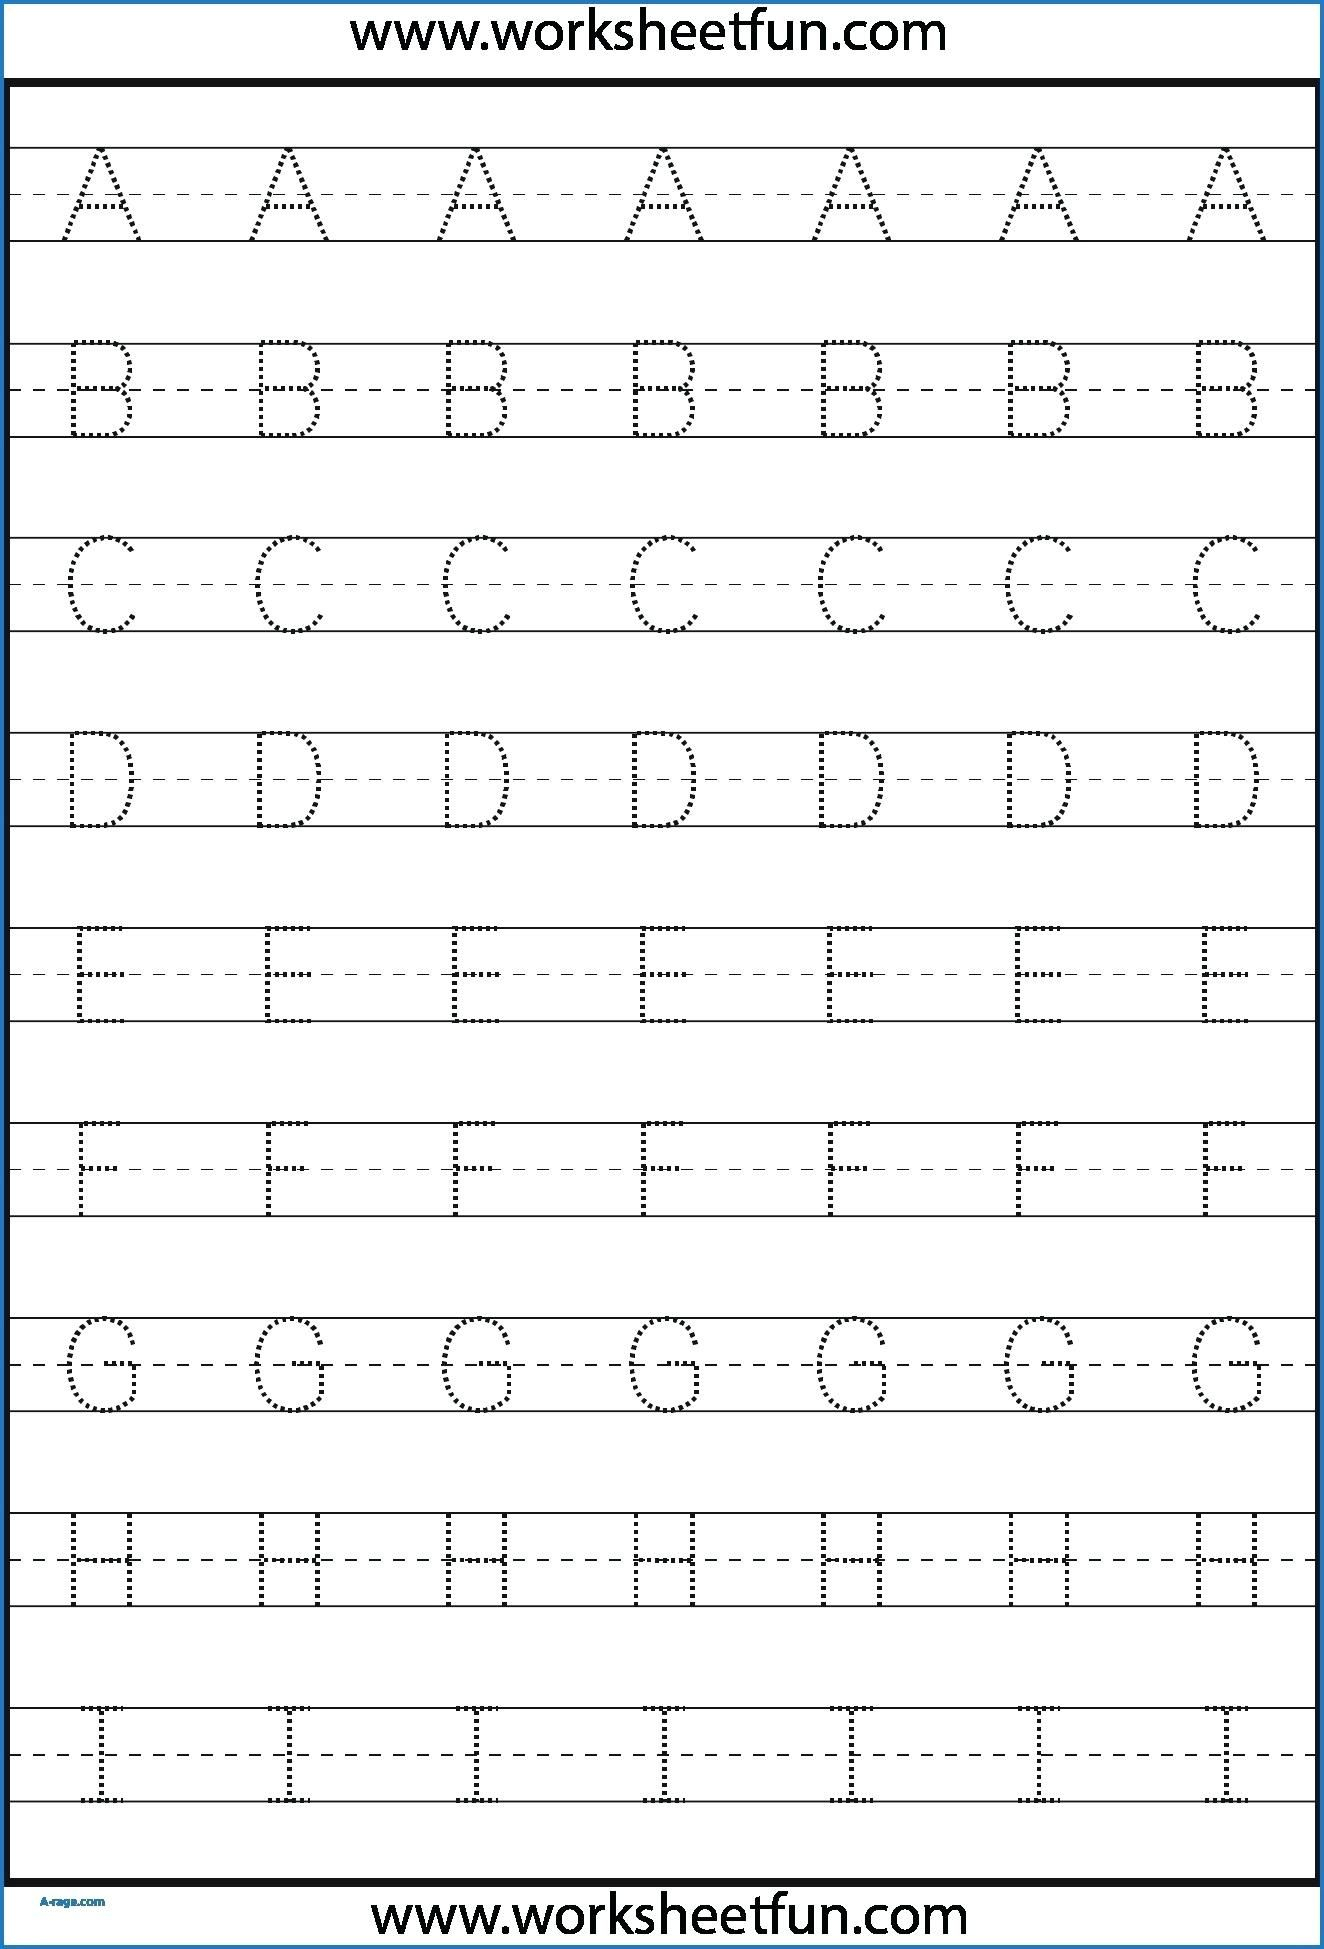 Kindergarten Letter Tracing Worksheets Pdf - Wallpaper Image throughout Tracing Uppercase Letters For Preschool